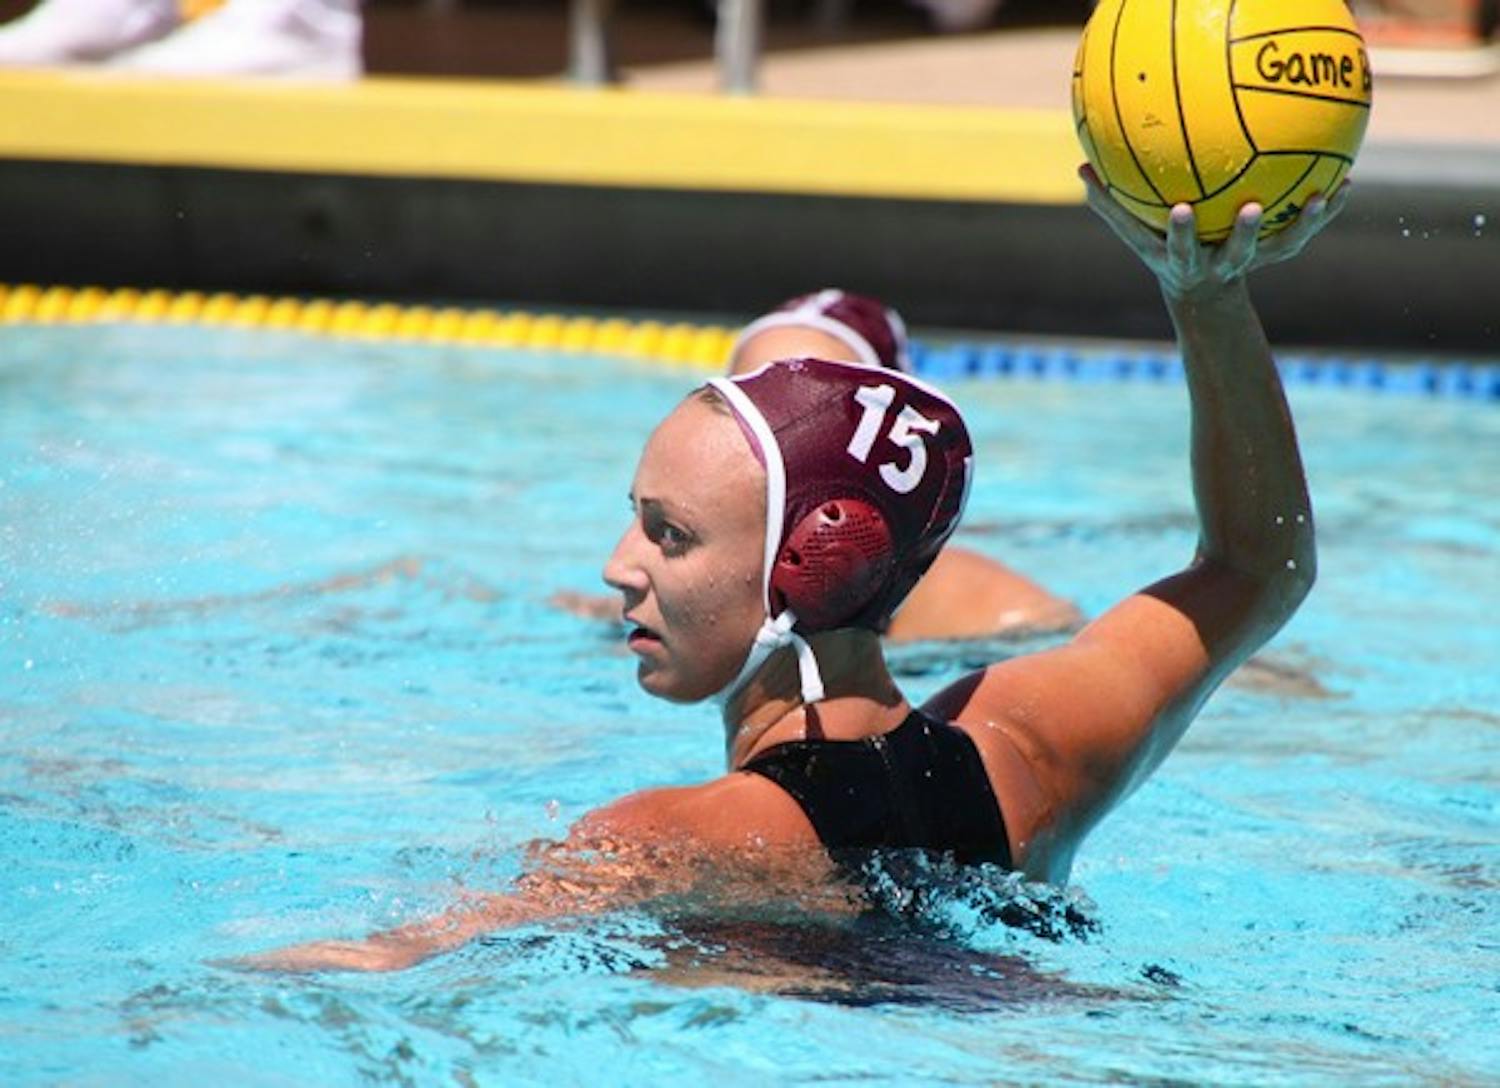 Try, try again: ASU senior Nikki Unbehaun looks to pass during the Sun Devils’ loss 10-8 to San Jose State on Saturday. The team will attempt to end its conference losing streak when they travel to No. 11 San Diego State this upcoming Saturday. (Photo by Rosie Gochnour)